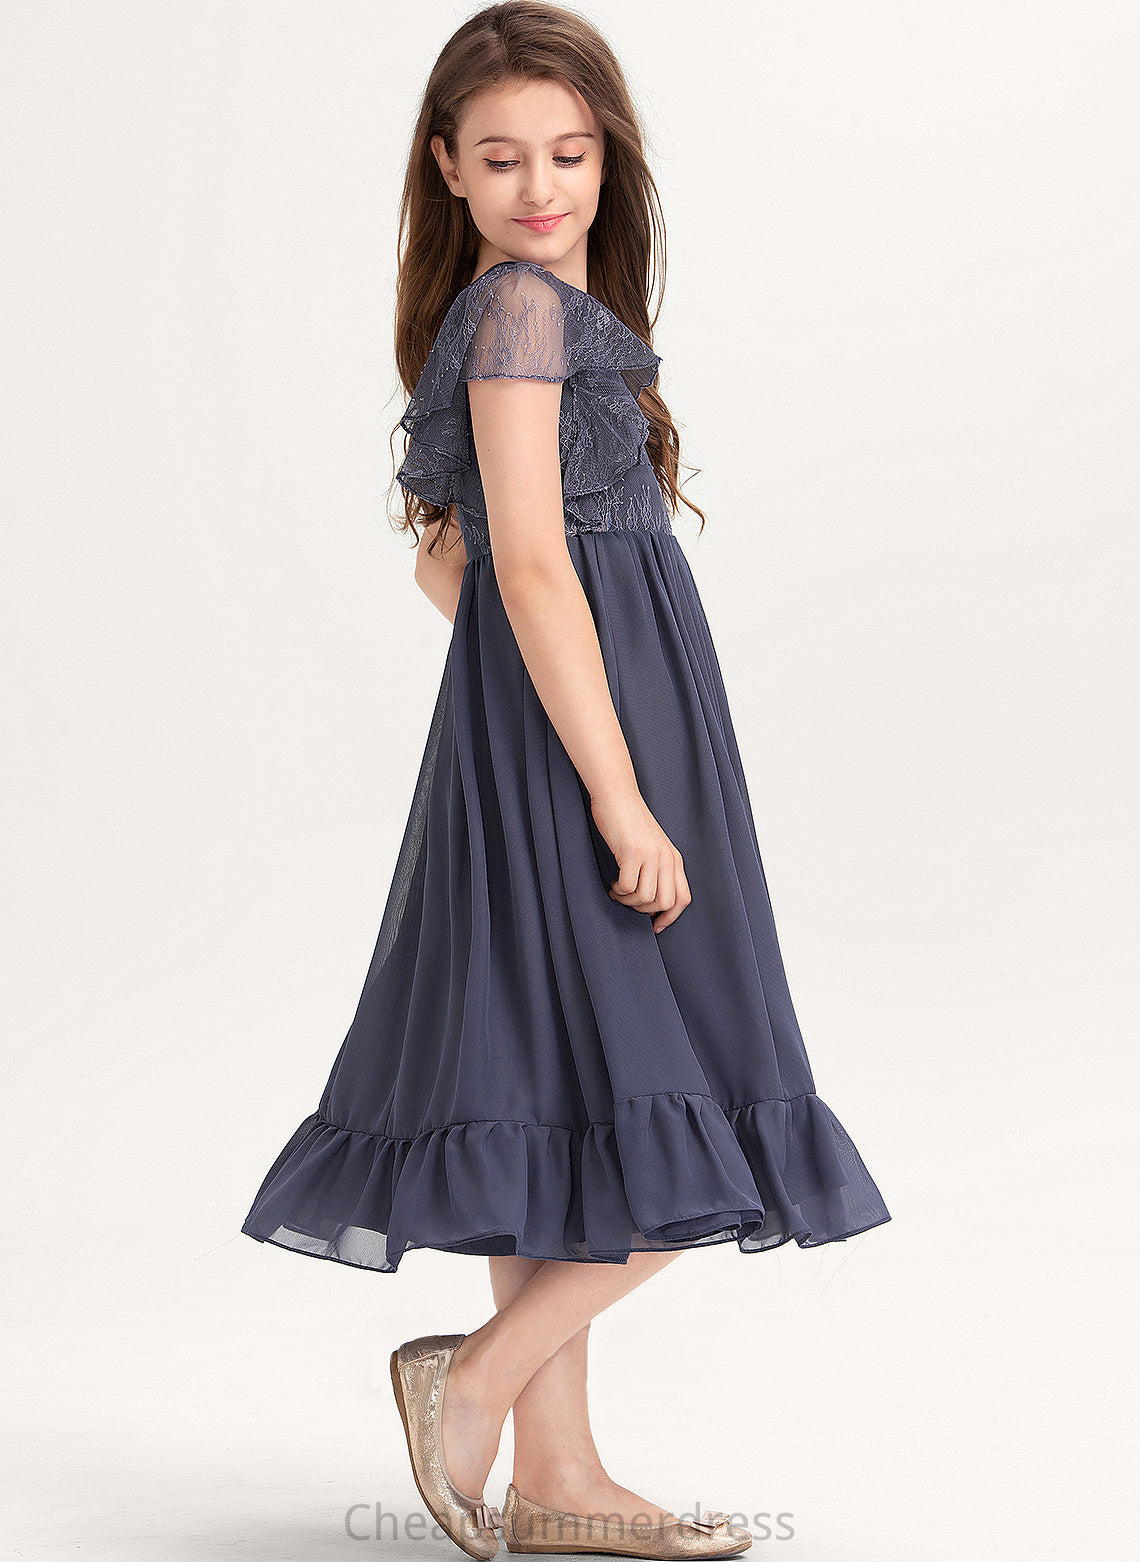 Neck Ruffles Cascading With Jayden Lace A-Line Scoop Knee-Length Junior Bridesmaid Dresses Chiffon